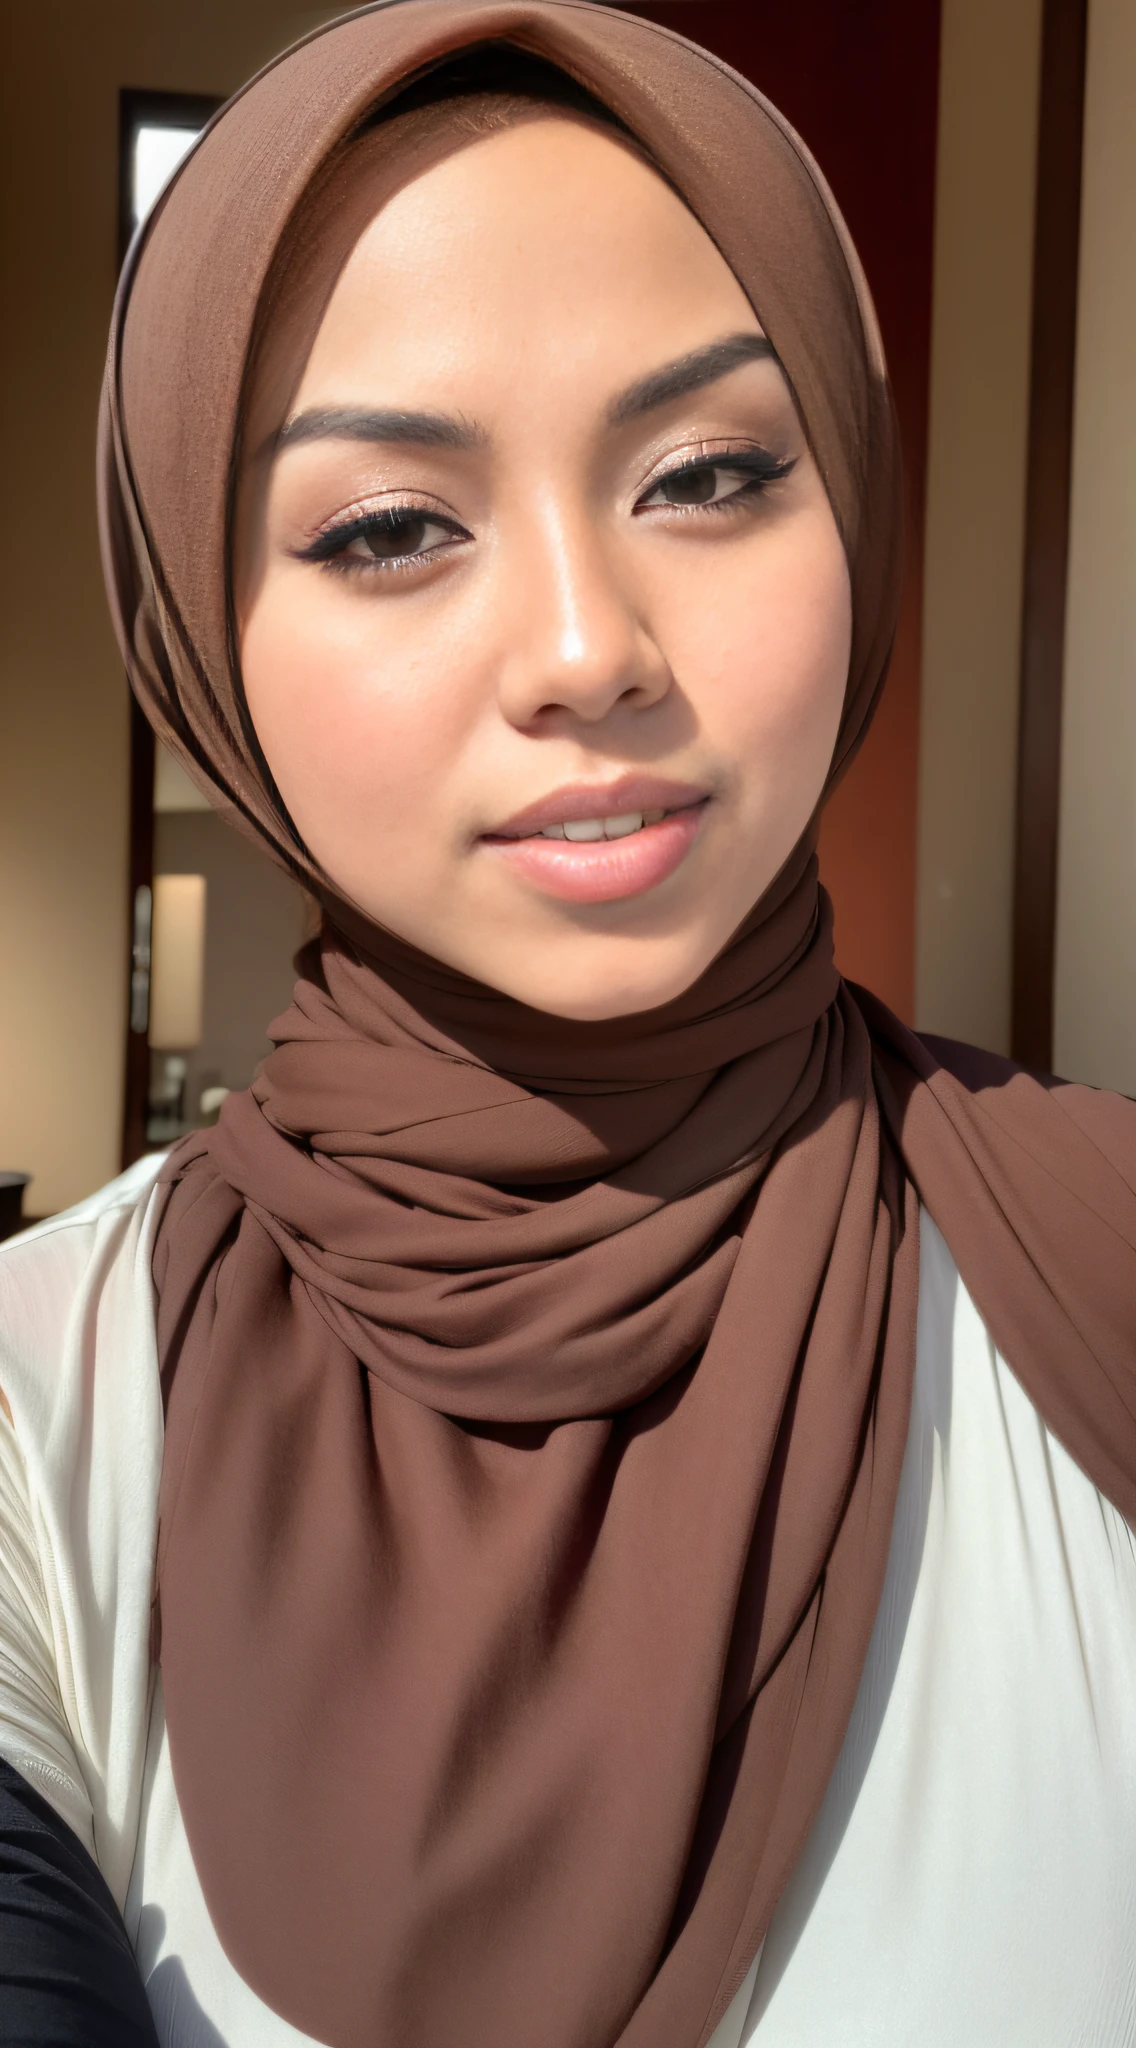 RAW, Best quality, high resolution, Masterpiece: 1.3), Beautiful Malay woman in hijab,Masterpiece, best quality,8k, brown eyes, perfect eyes,perfect body, ((Huge breasts)),(close up) ,woman in a hijab poses for a picture, hijab, lovely woman, white hijab, Beutifull girl, casual pose, attractive girl, malay, background  heavenly, an asian woman, wearing casual clothes, with lovely look, malay girl, beautiful image, beautiful woman, attractive pose, beautiful girl